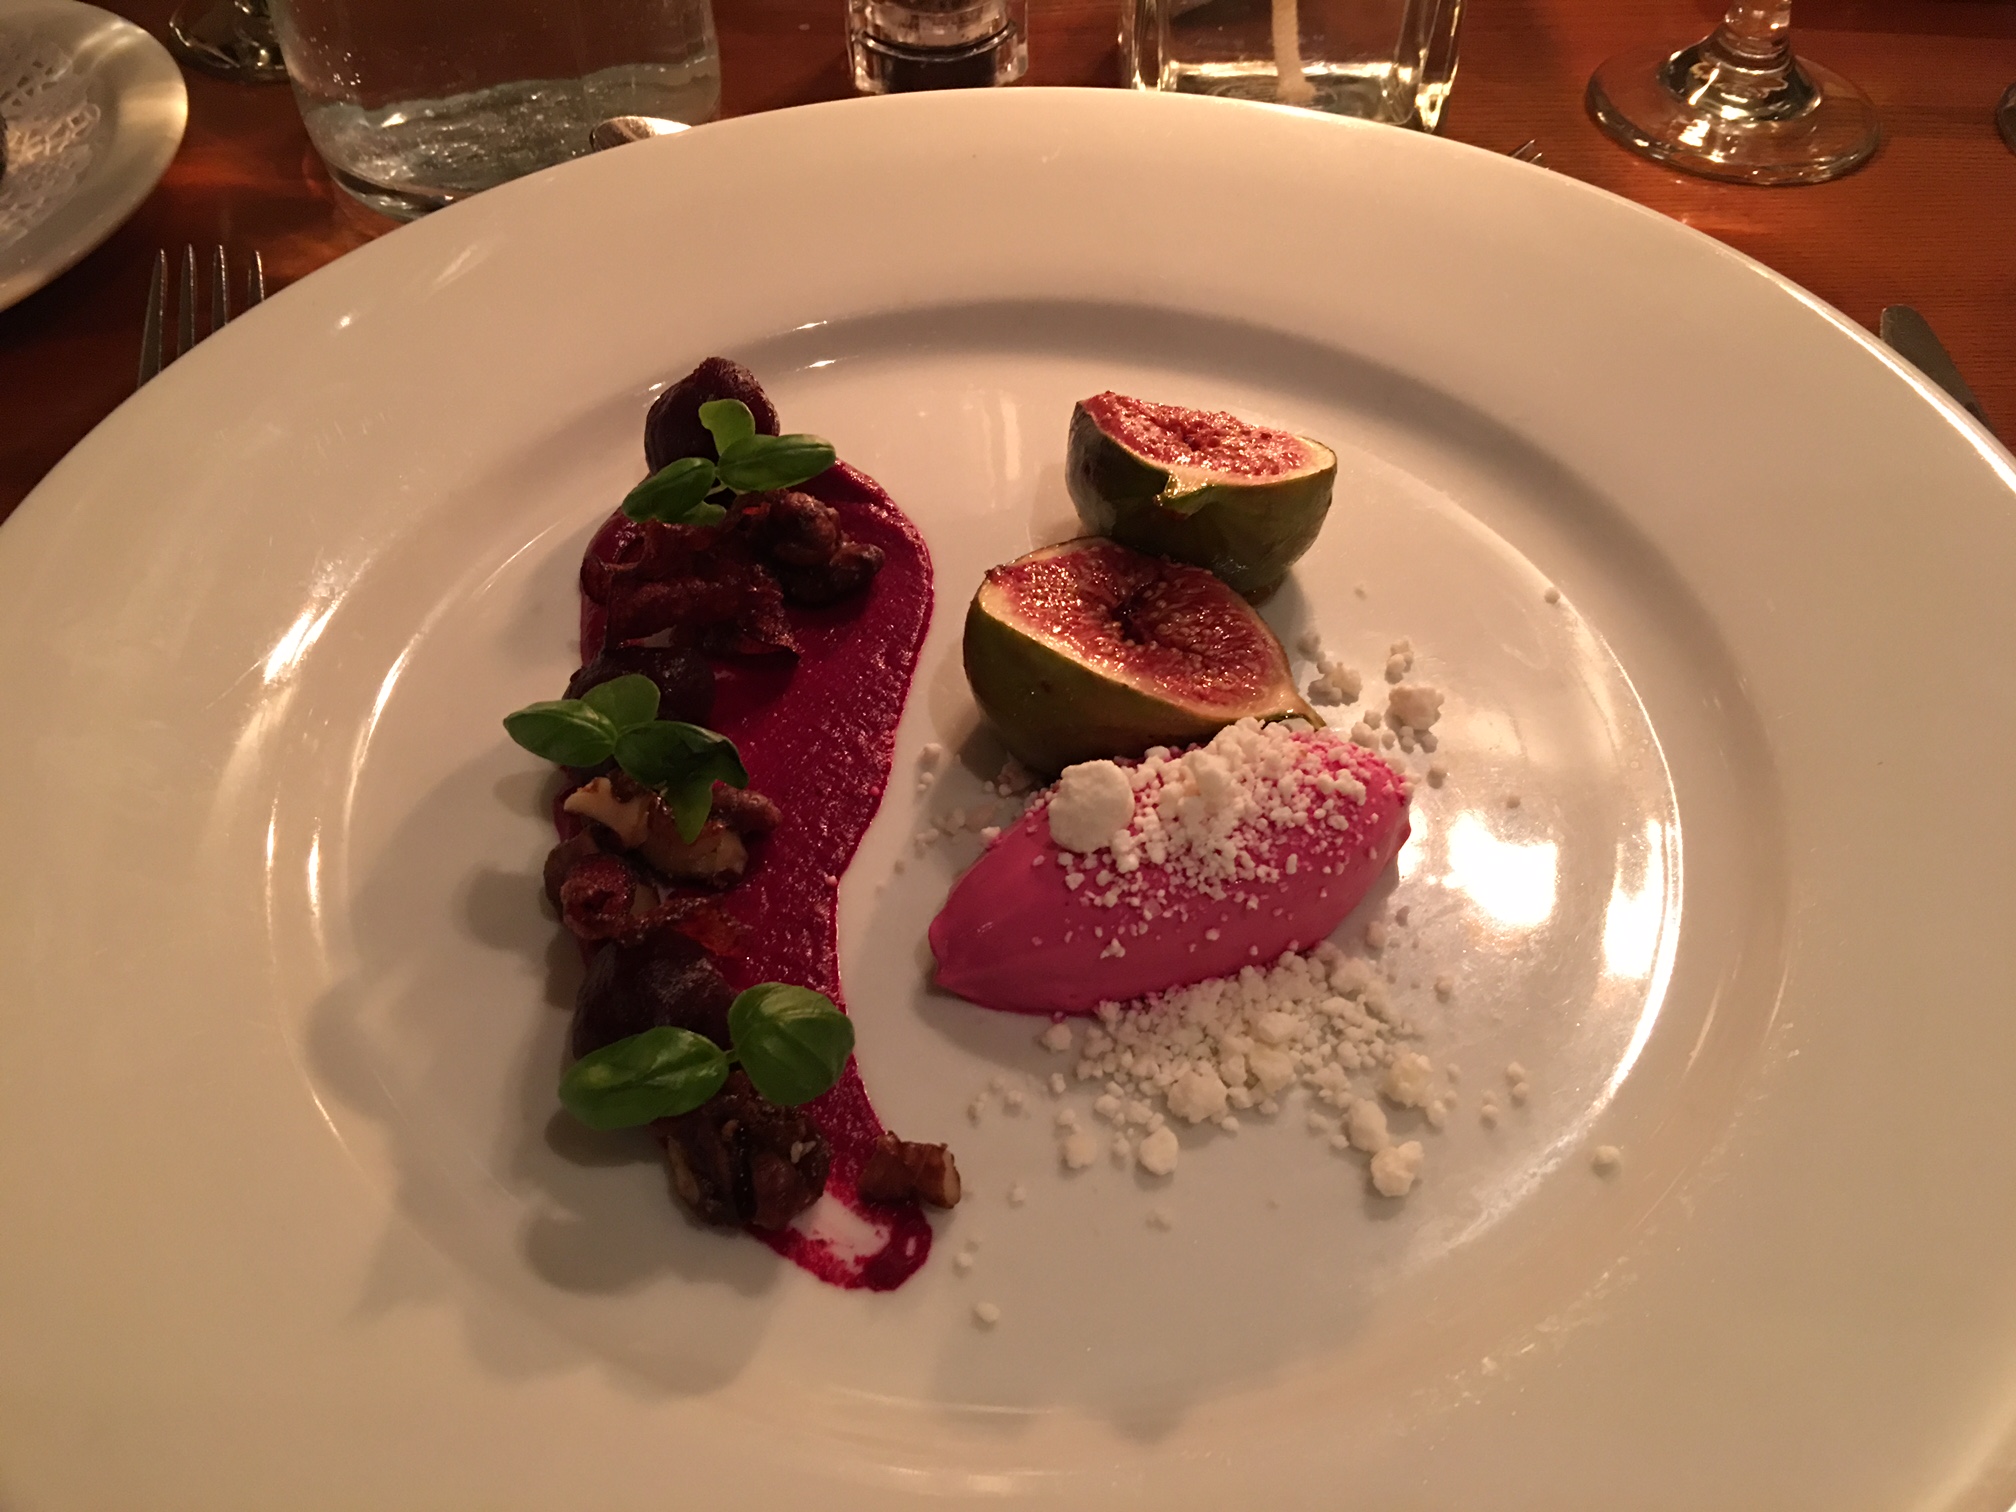 The beetroot and goats cheese mousse